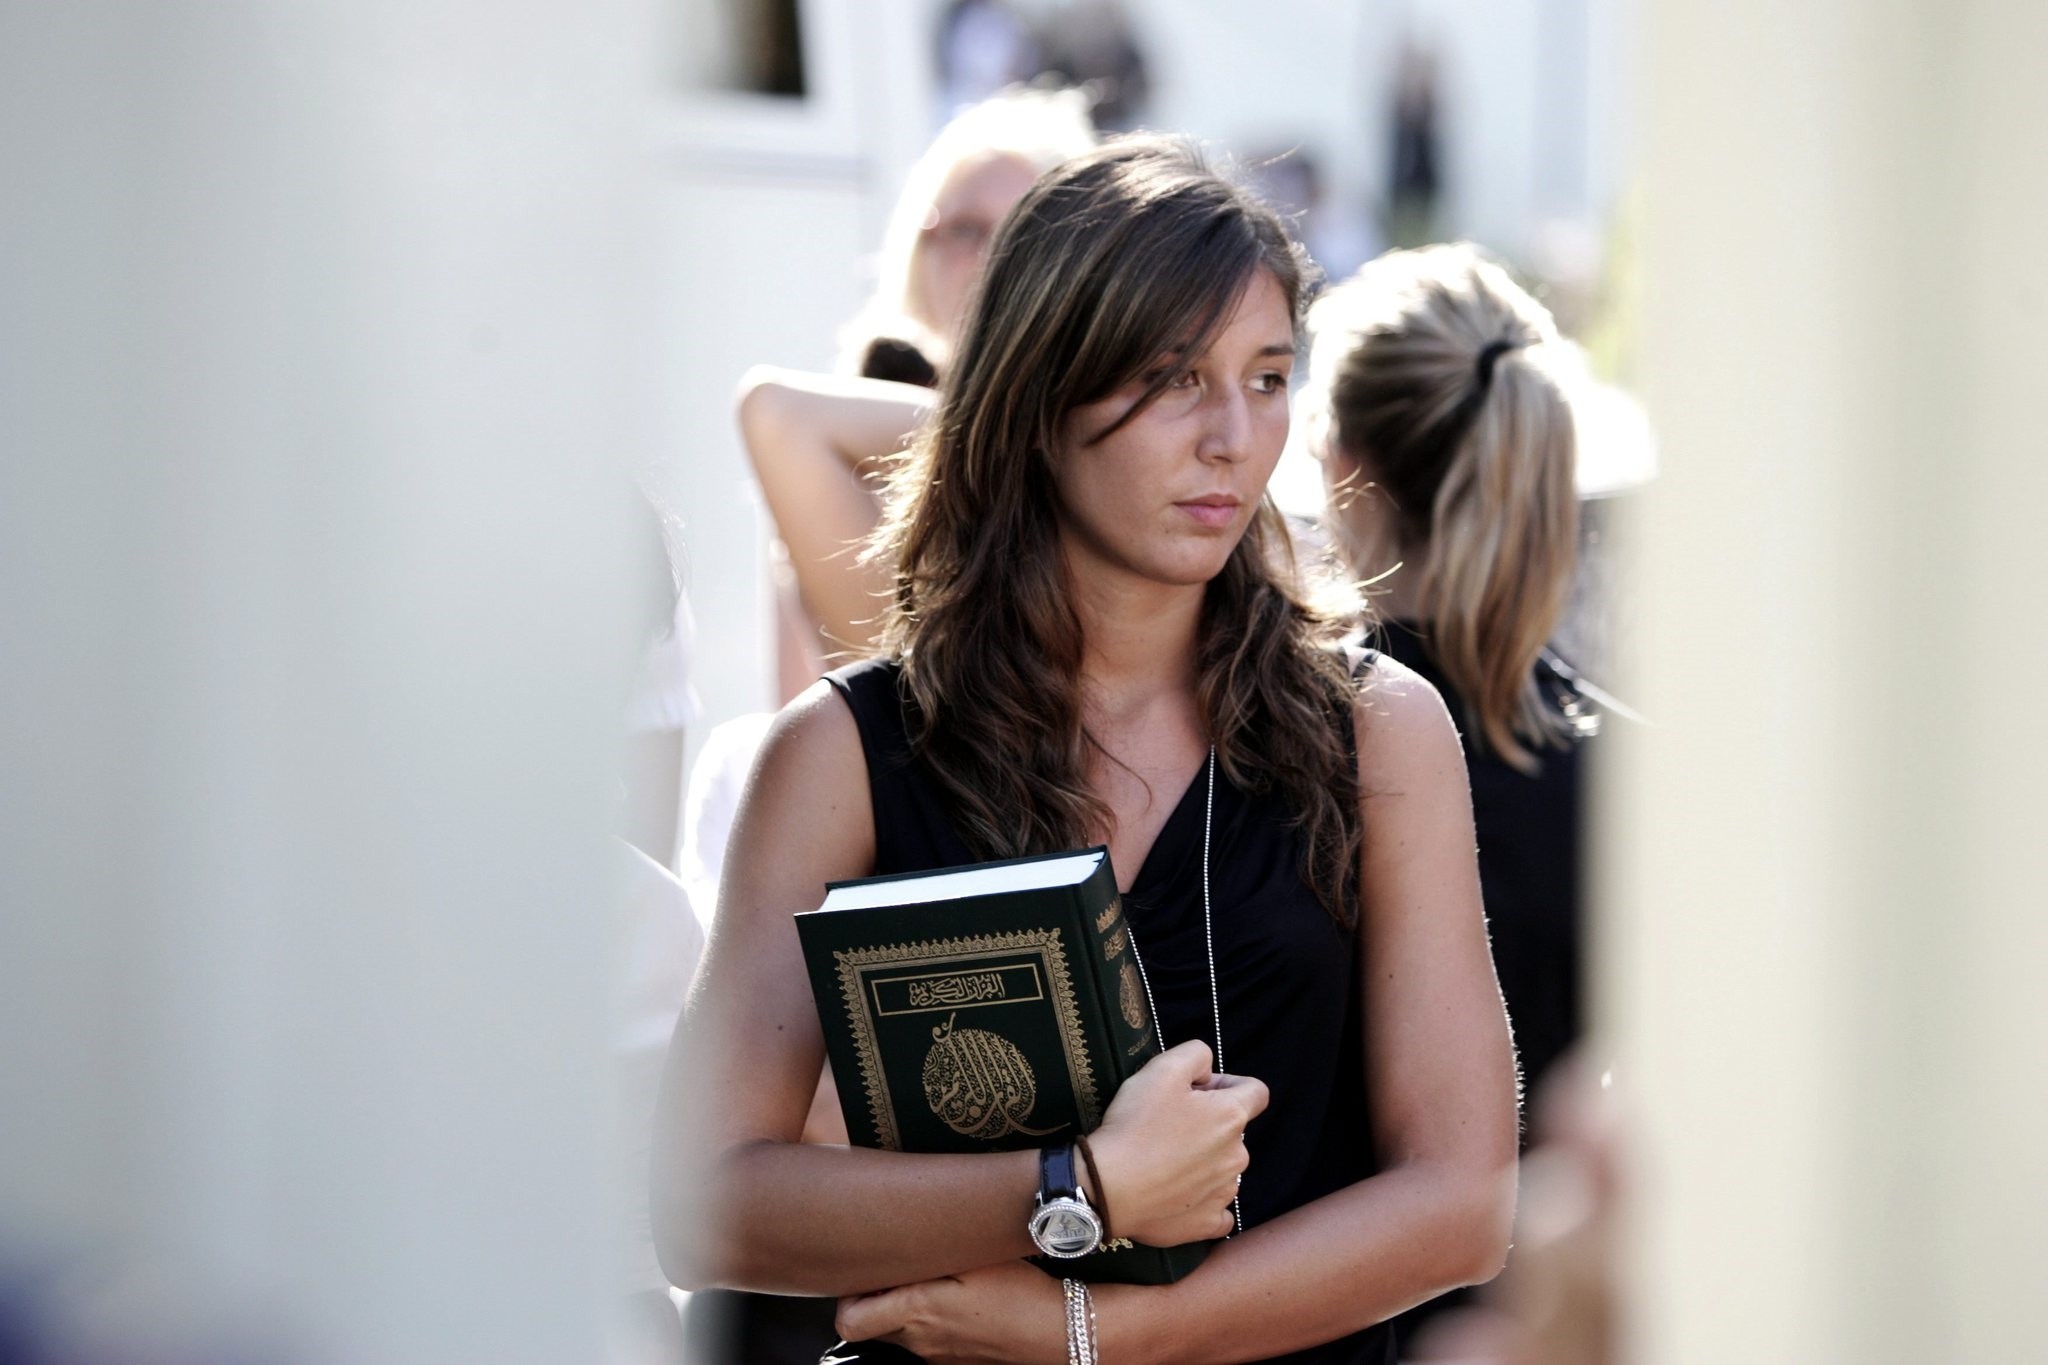 A  woman holds a copy of the Koran after a meeting with Libyan leader Moammar Gadhafi, at the Libyan Academy near the Libyan ambassador's residence in Rome, Sunday, Aug. 29, 2010. (AP Photo) 